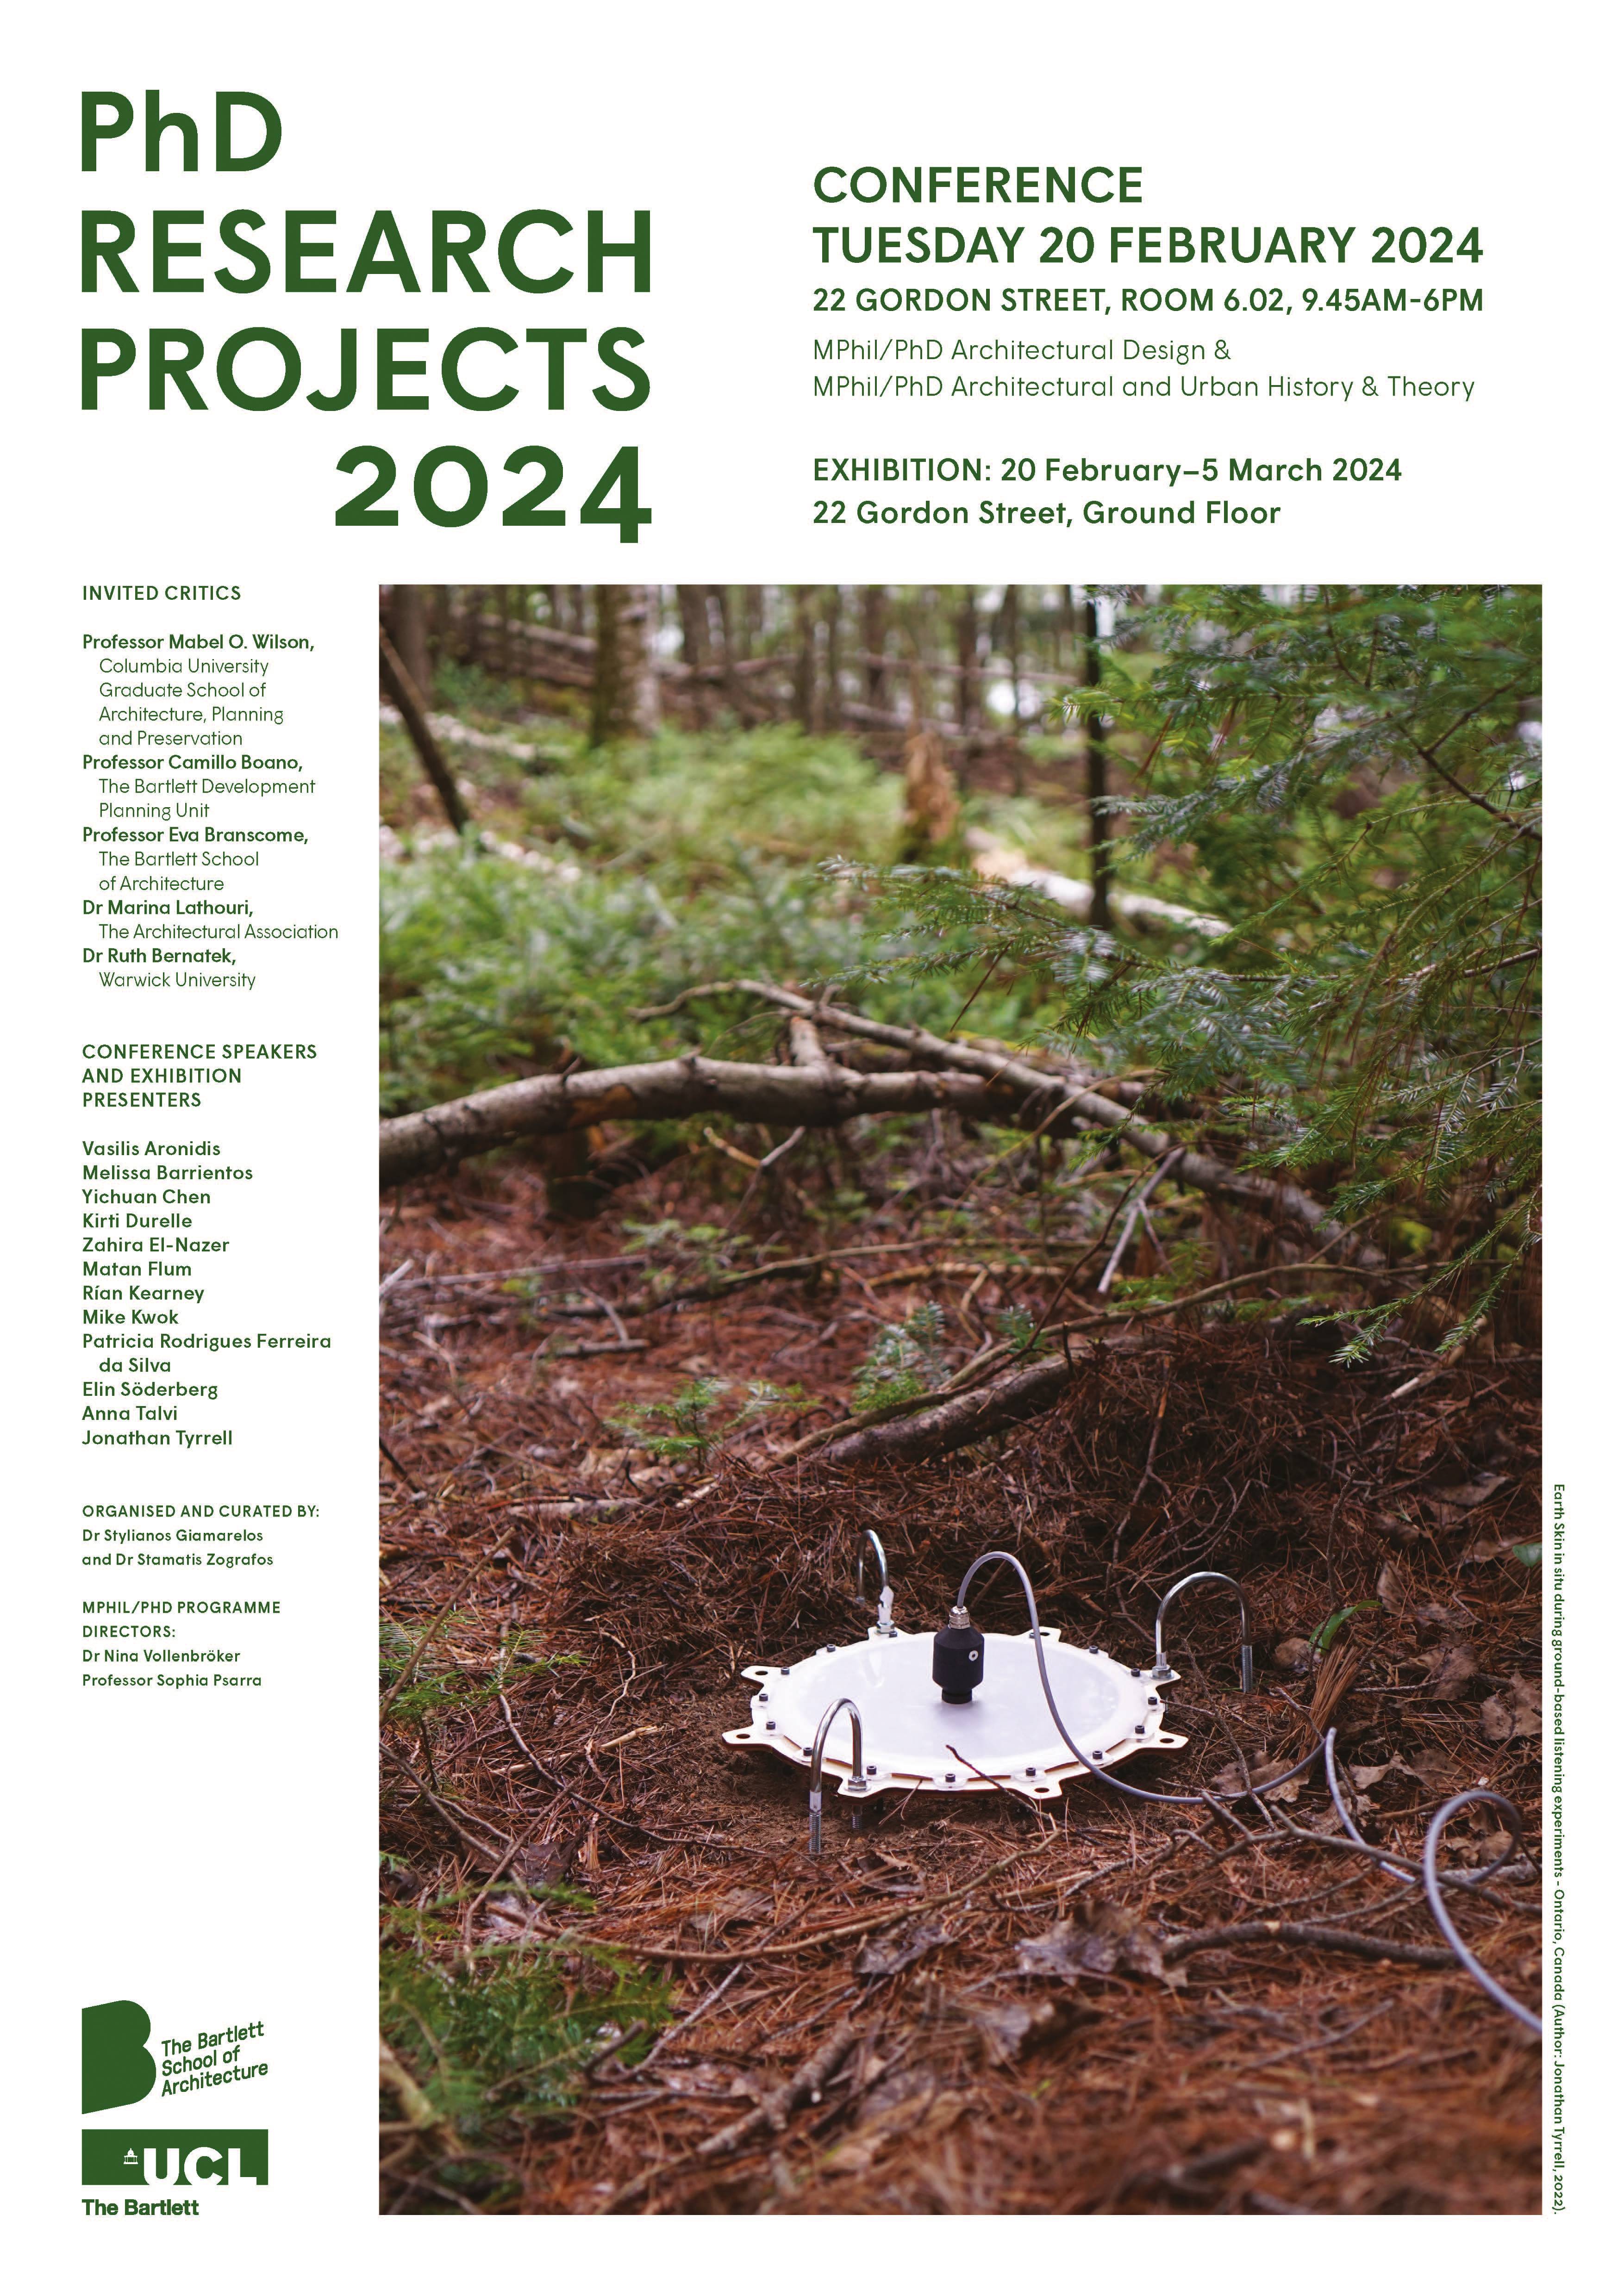 PhD Research Projects 2024 Poster